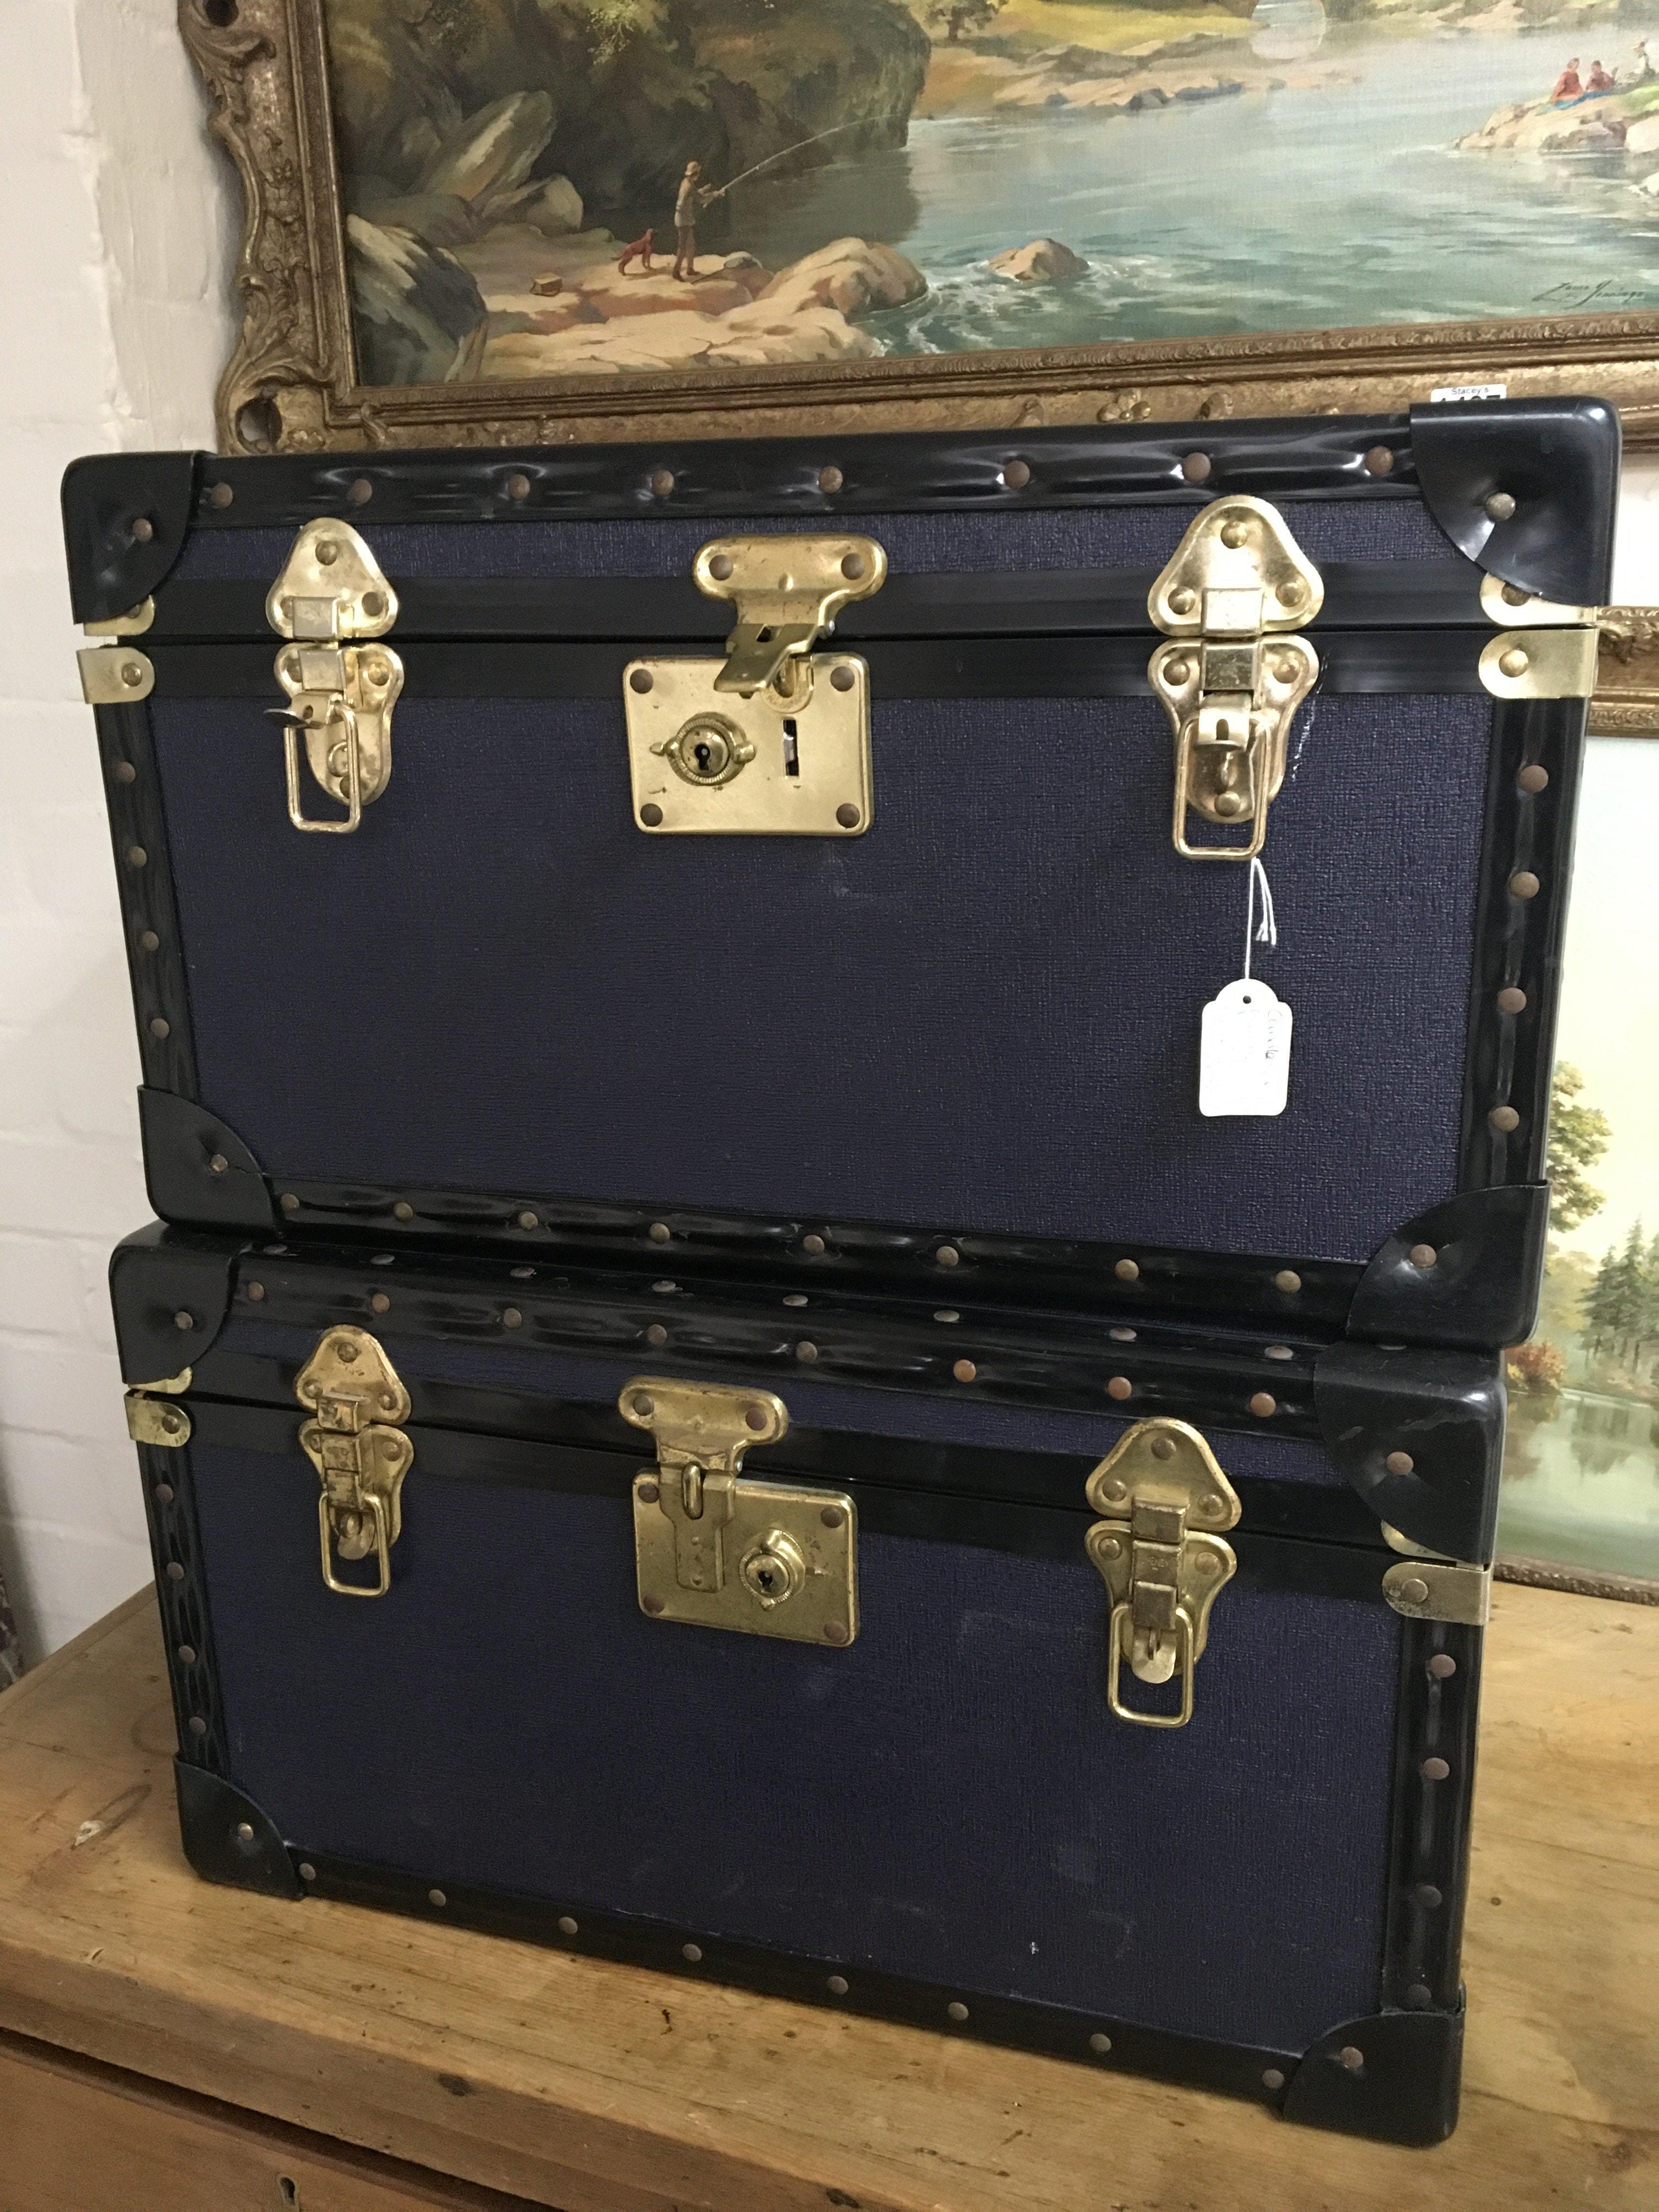 Two blue and black edge storage trunks with brass